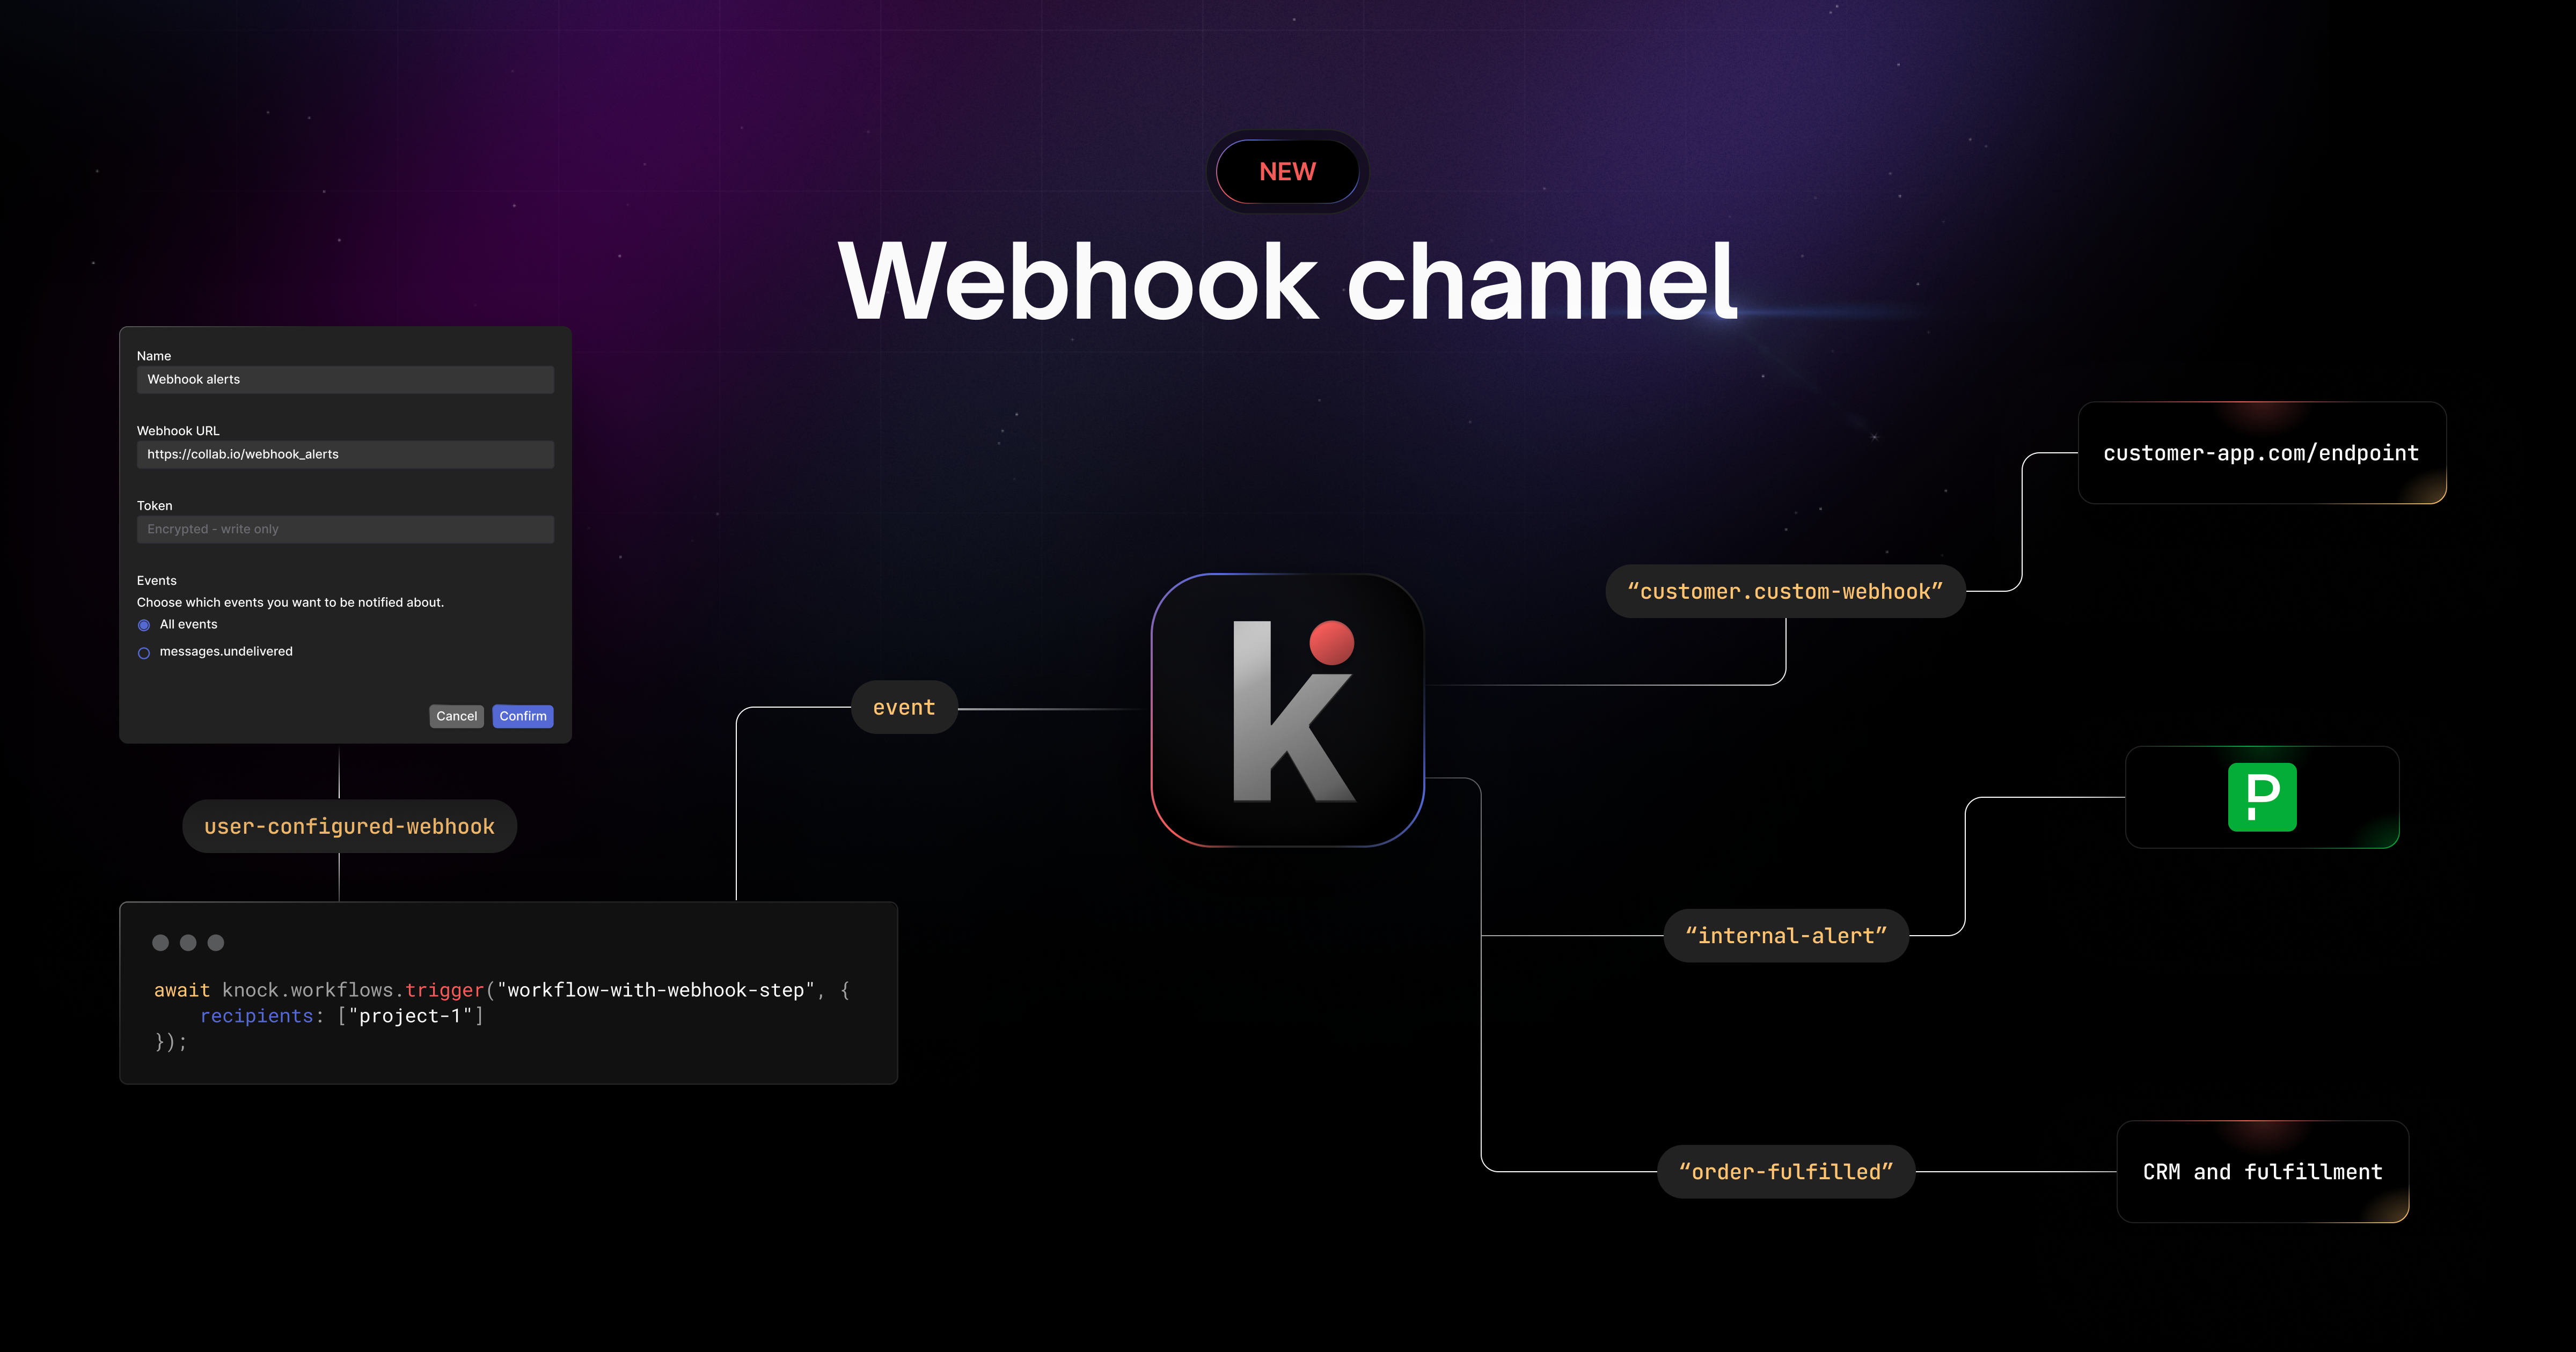 Announcing the Knock webhook channel